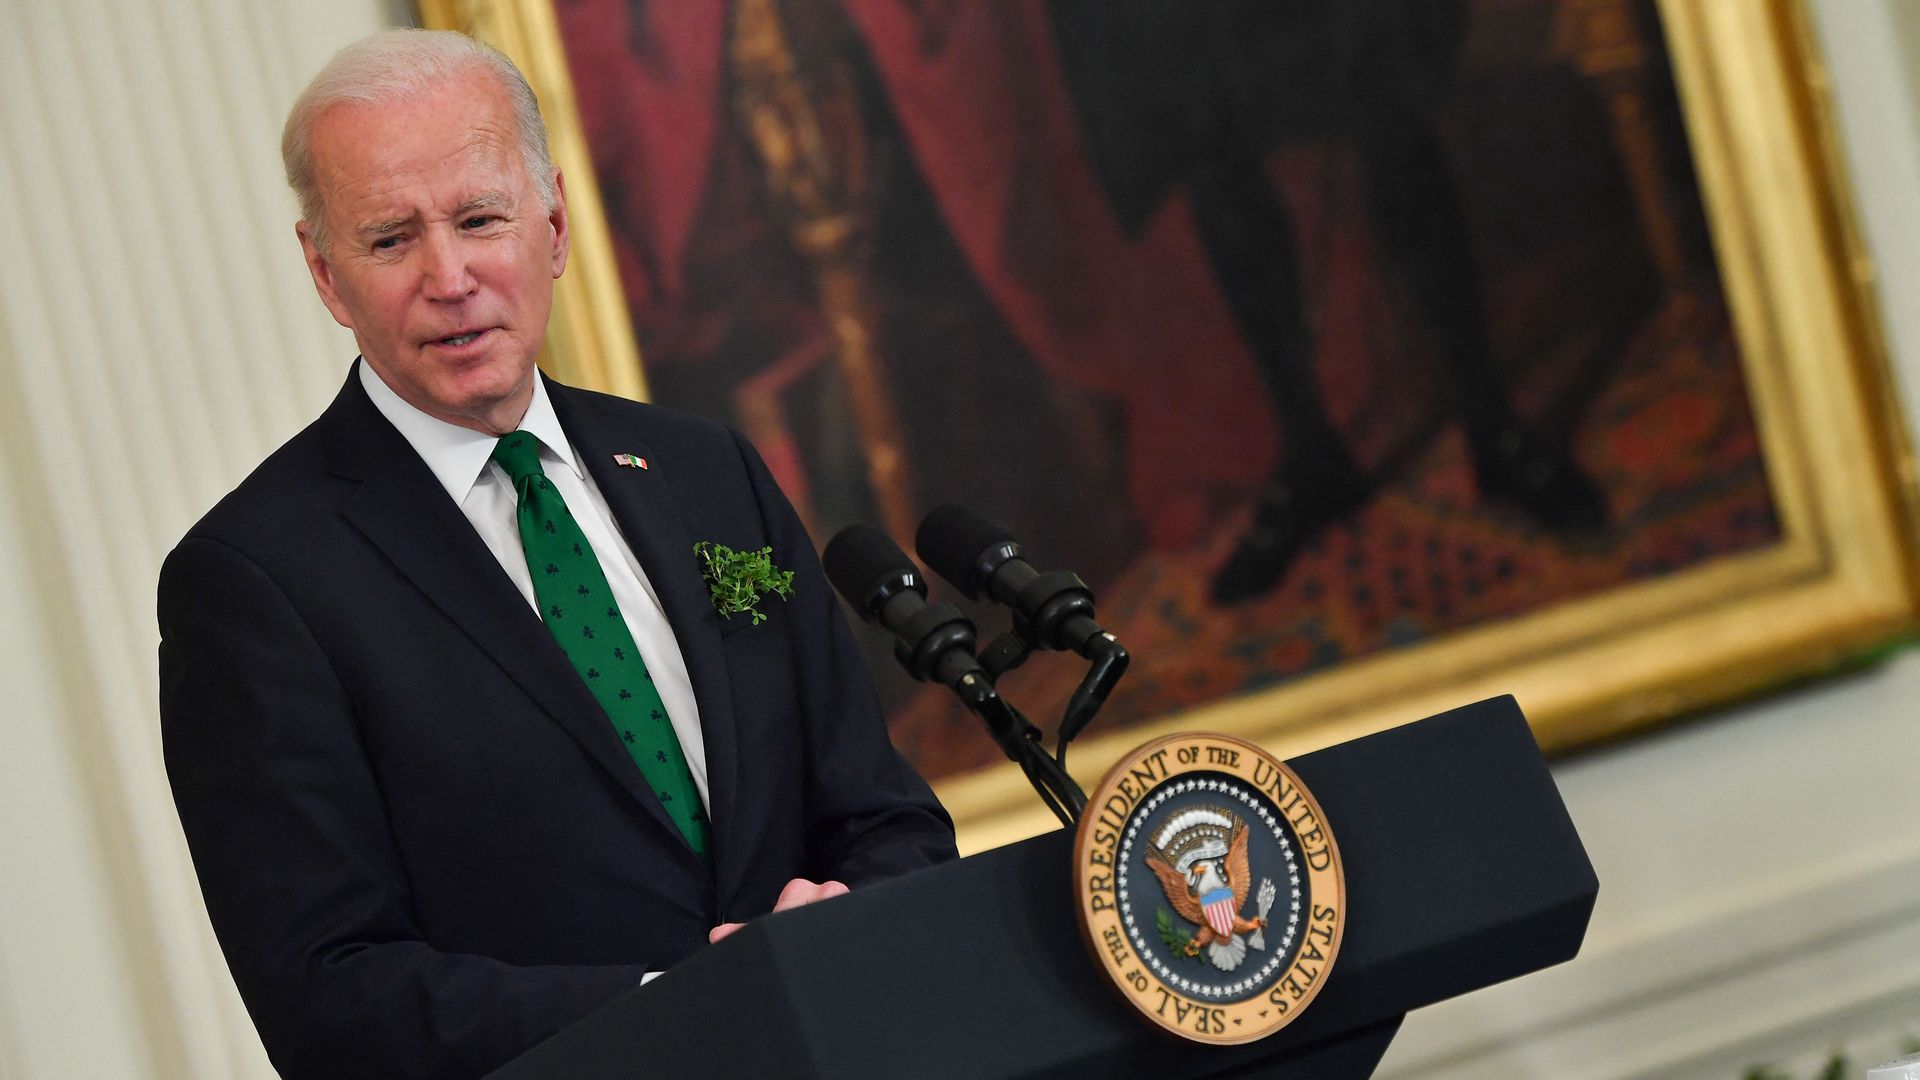 President Biden is seen in a green tie during a St. Patrick's Day event at the White House.